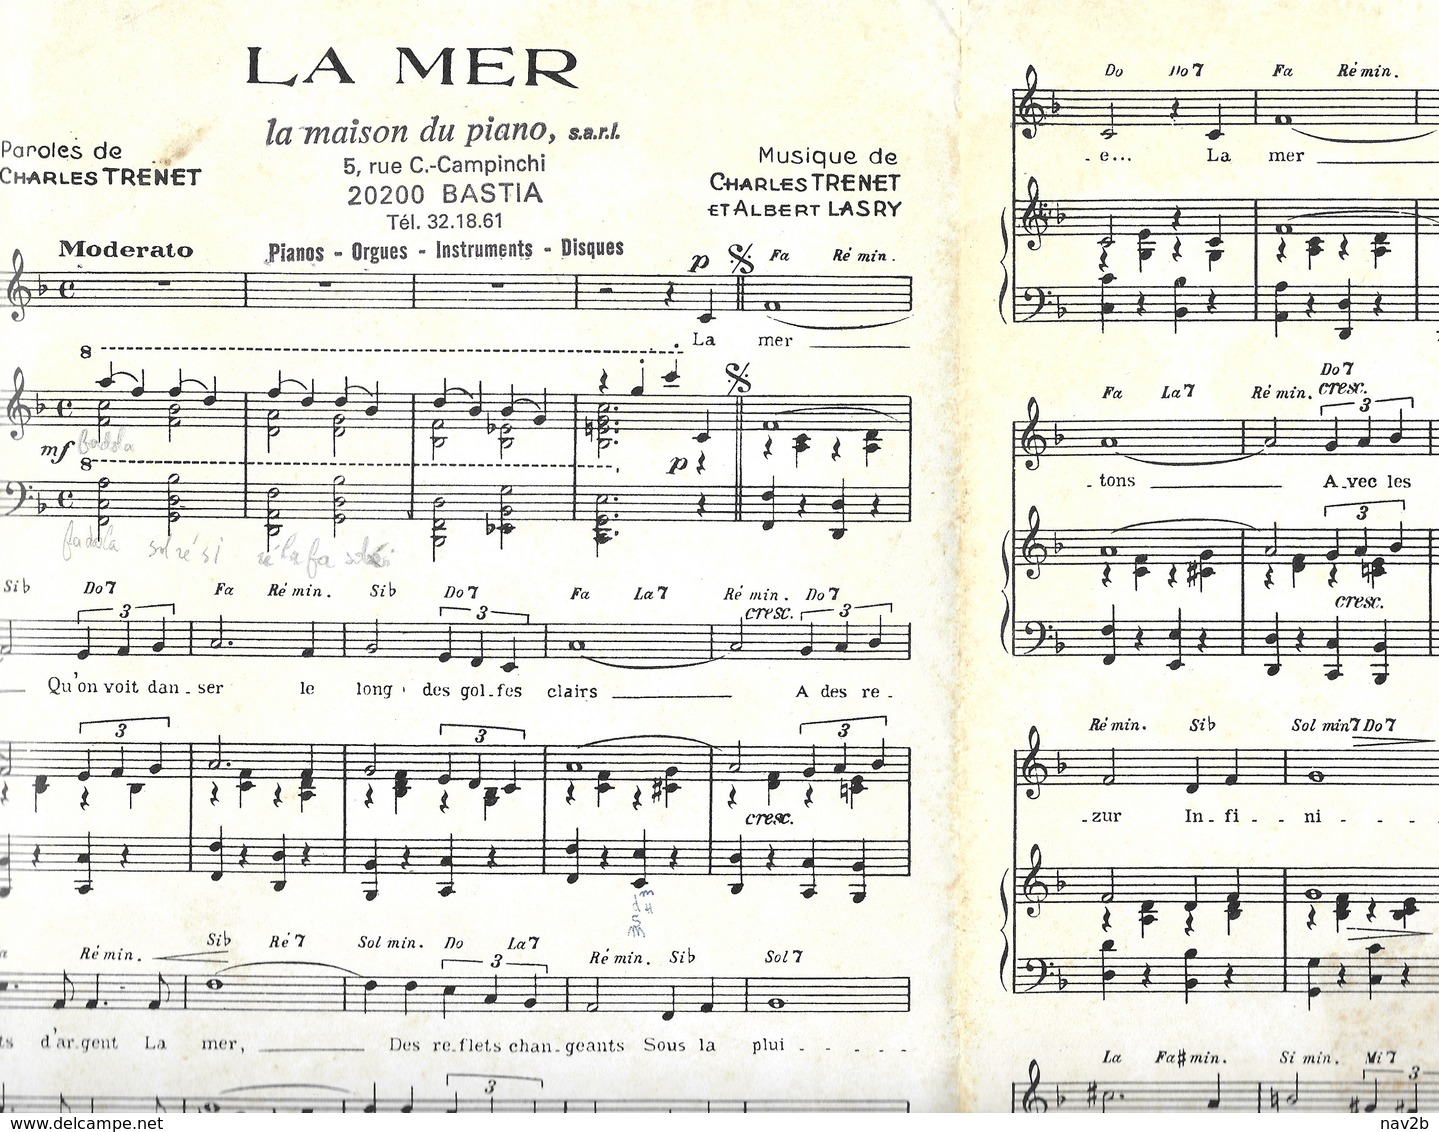 LA MER .  Charles  TRENET . - Partitions Musicales Anciennes